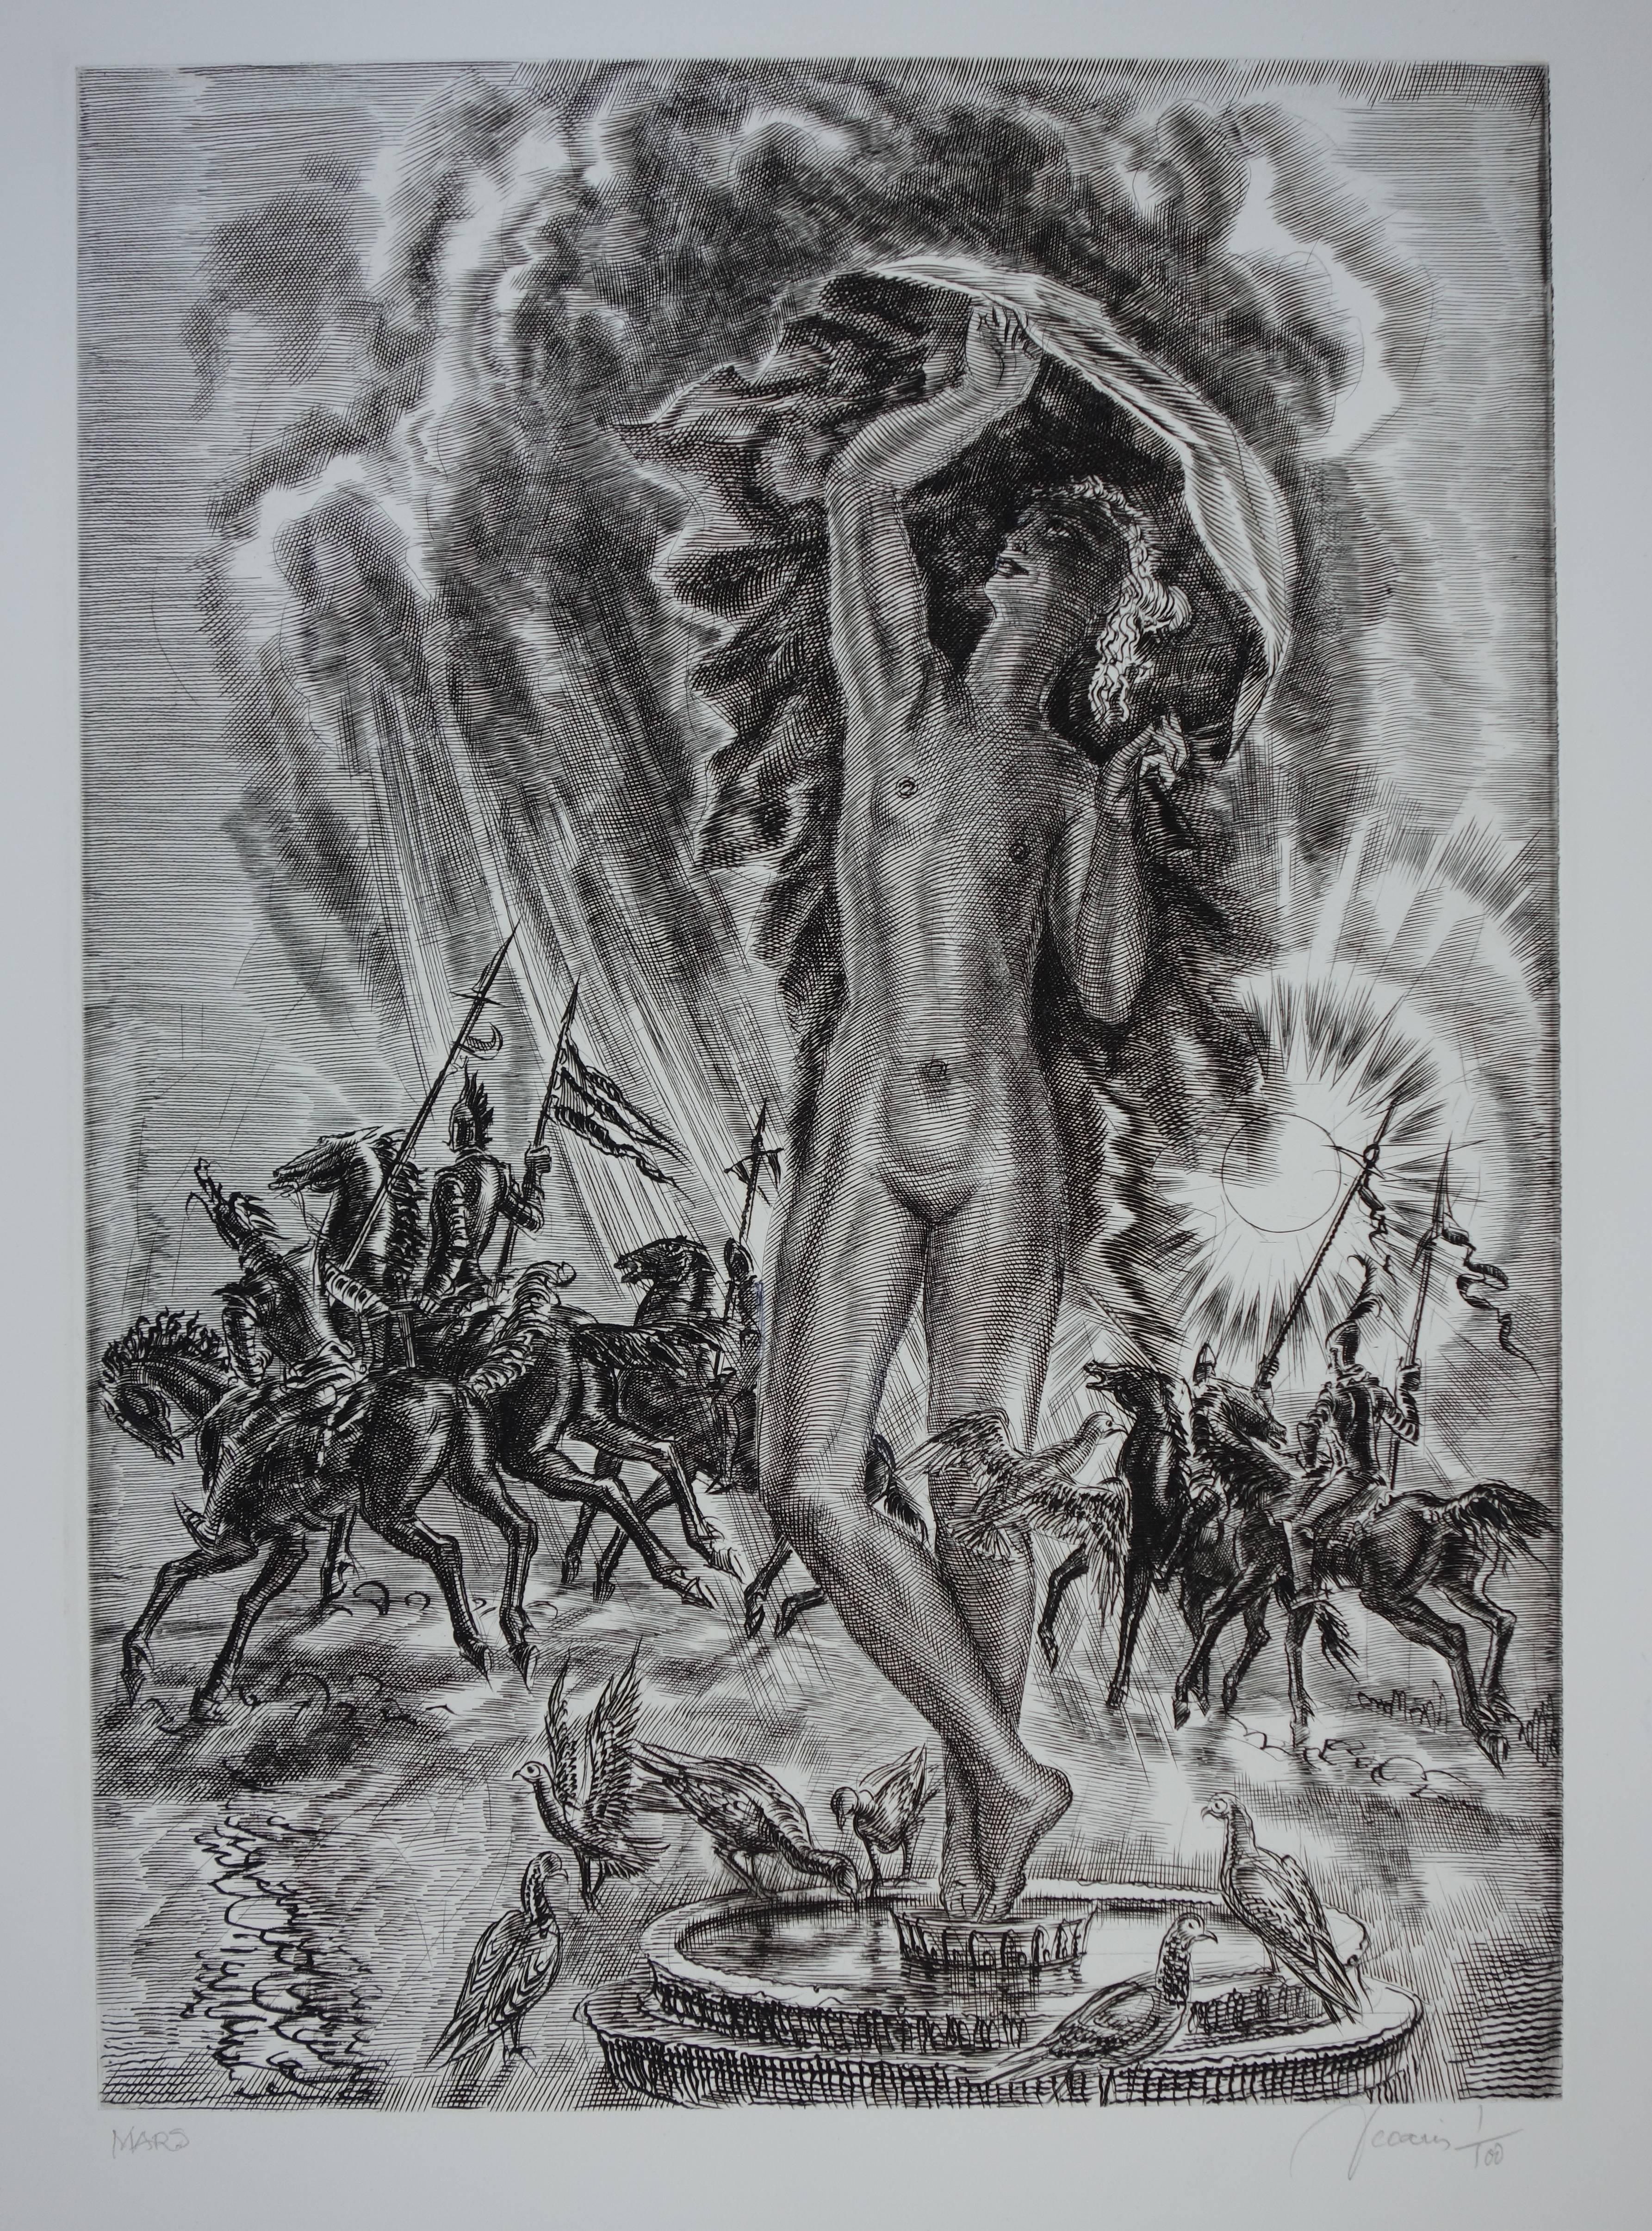 Albert Decaris Figurative Print - March : Last Fight of Winter - Original handsigned etching - Exceptional n°1/100